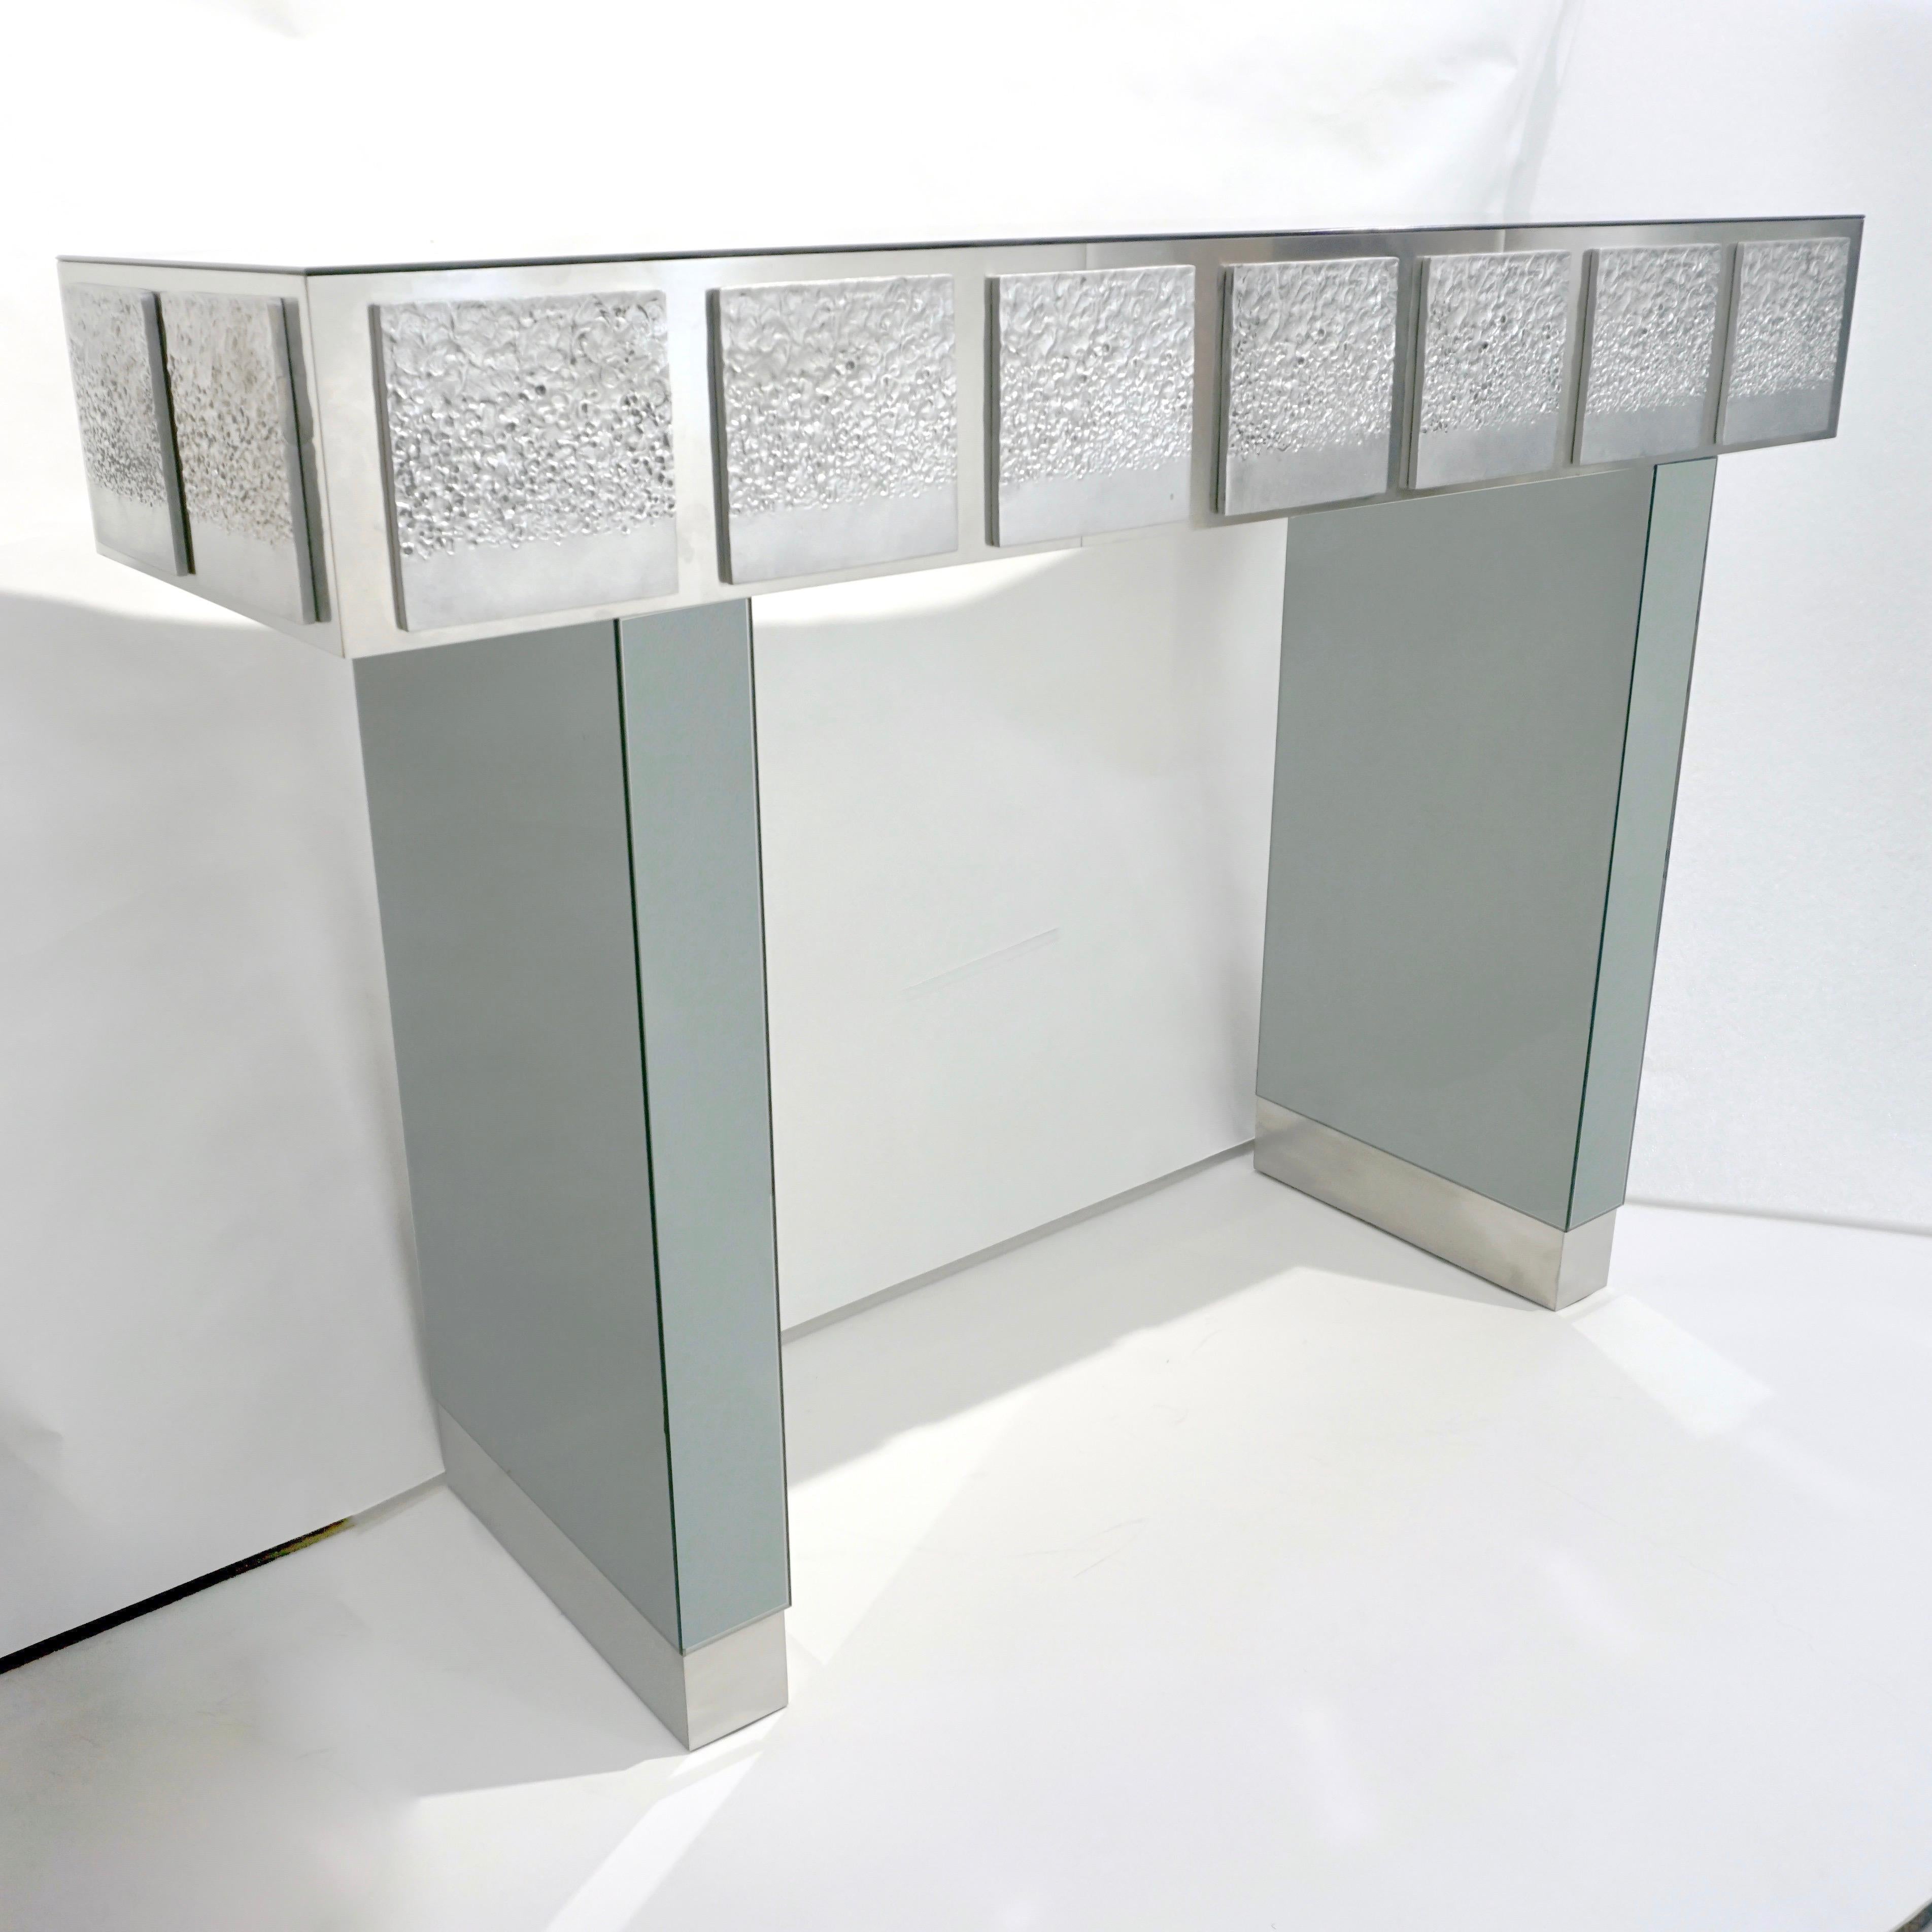 Bespoke Italian Contemporary One-of-a-Kind Polished Steel Smoked Mirror Console For Sale 1